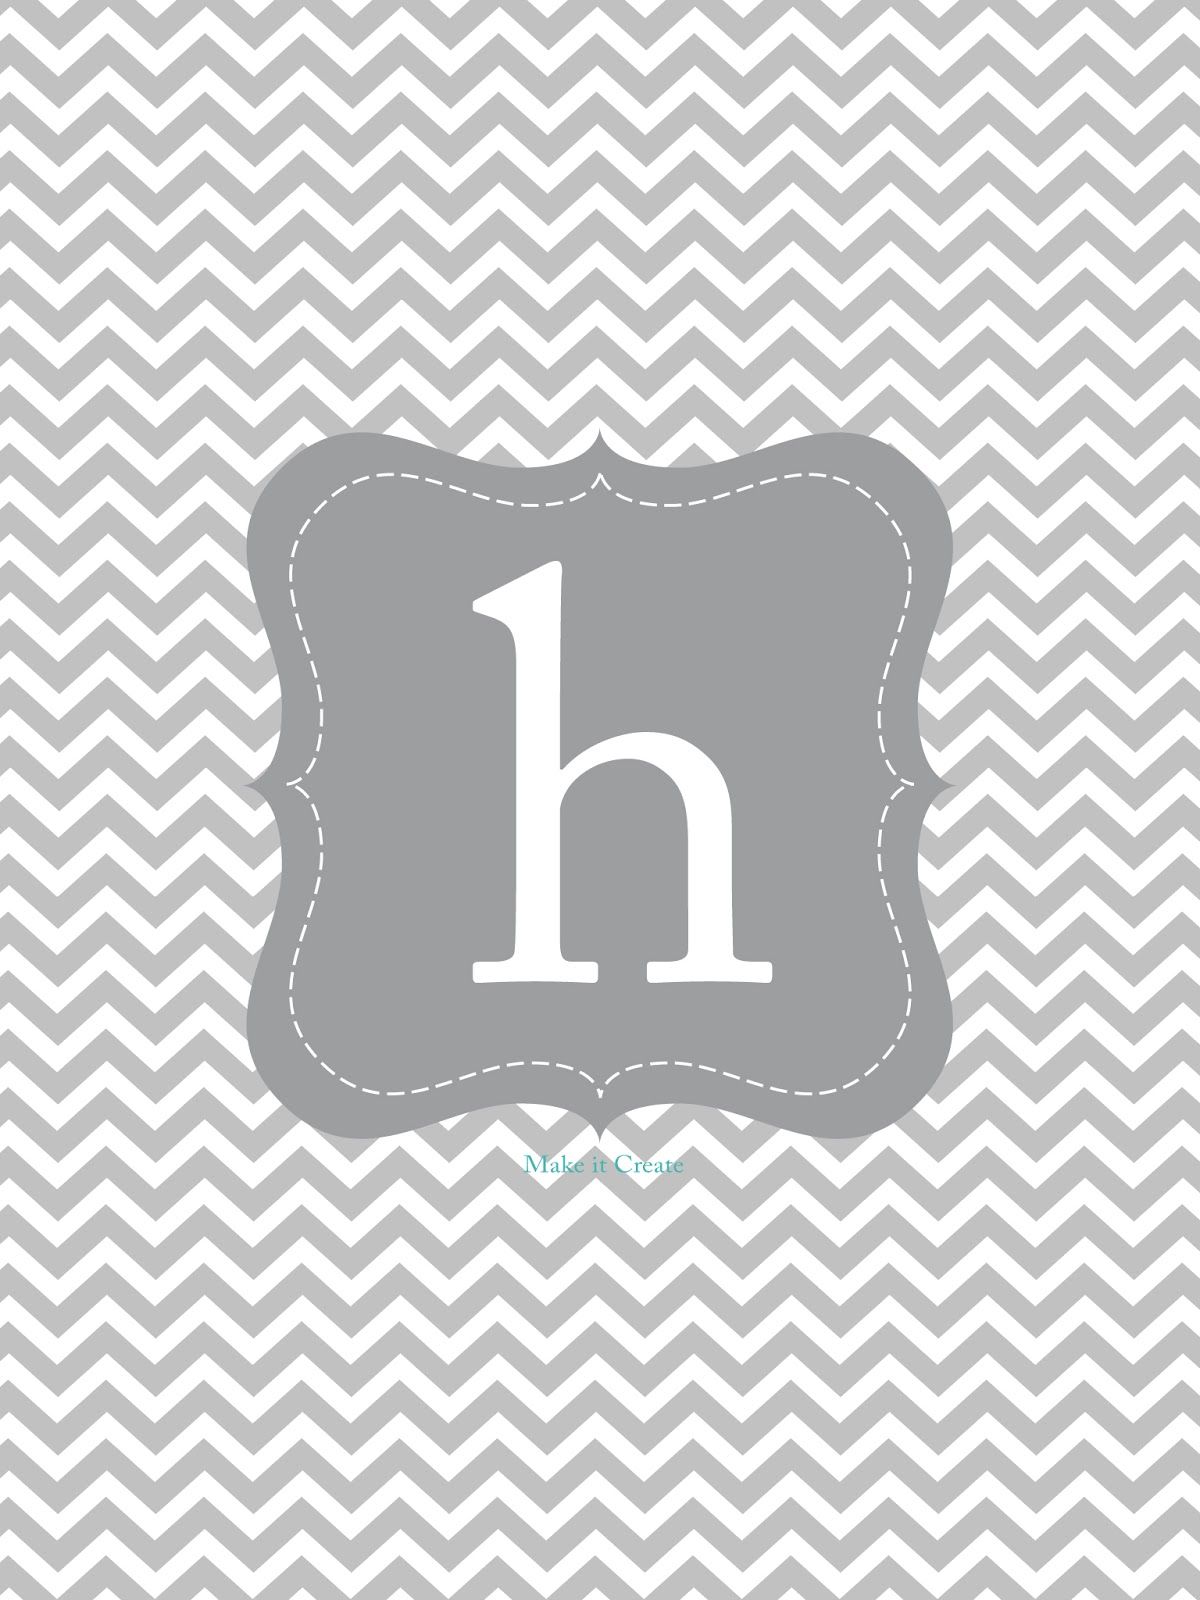 Initial H Wallpaper. Make Your Own Initial Wallpaper, Sparkly E Initial Wallpaper and Initial C Wallpaper